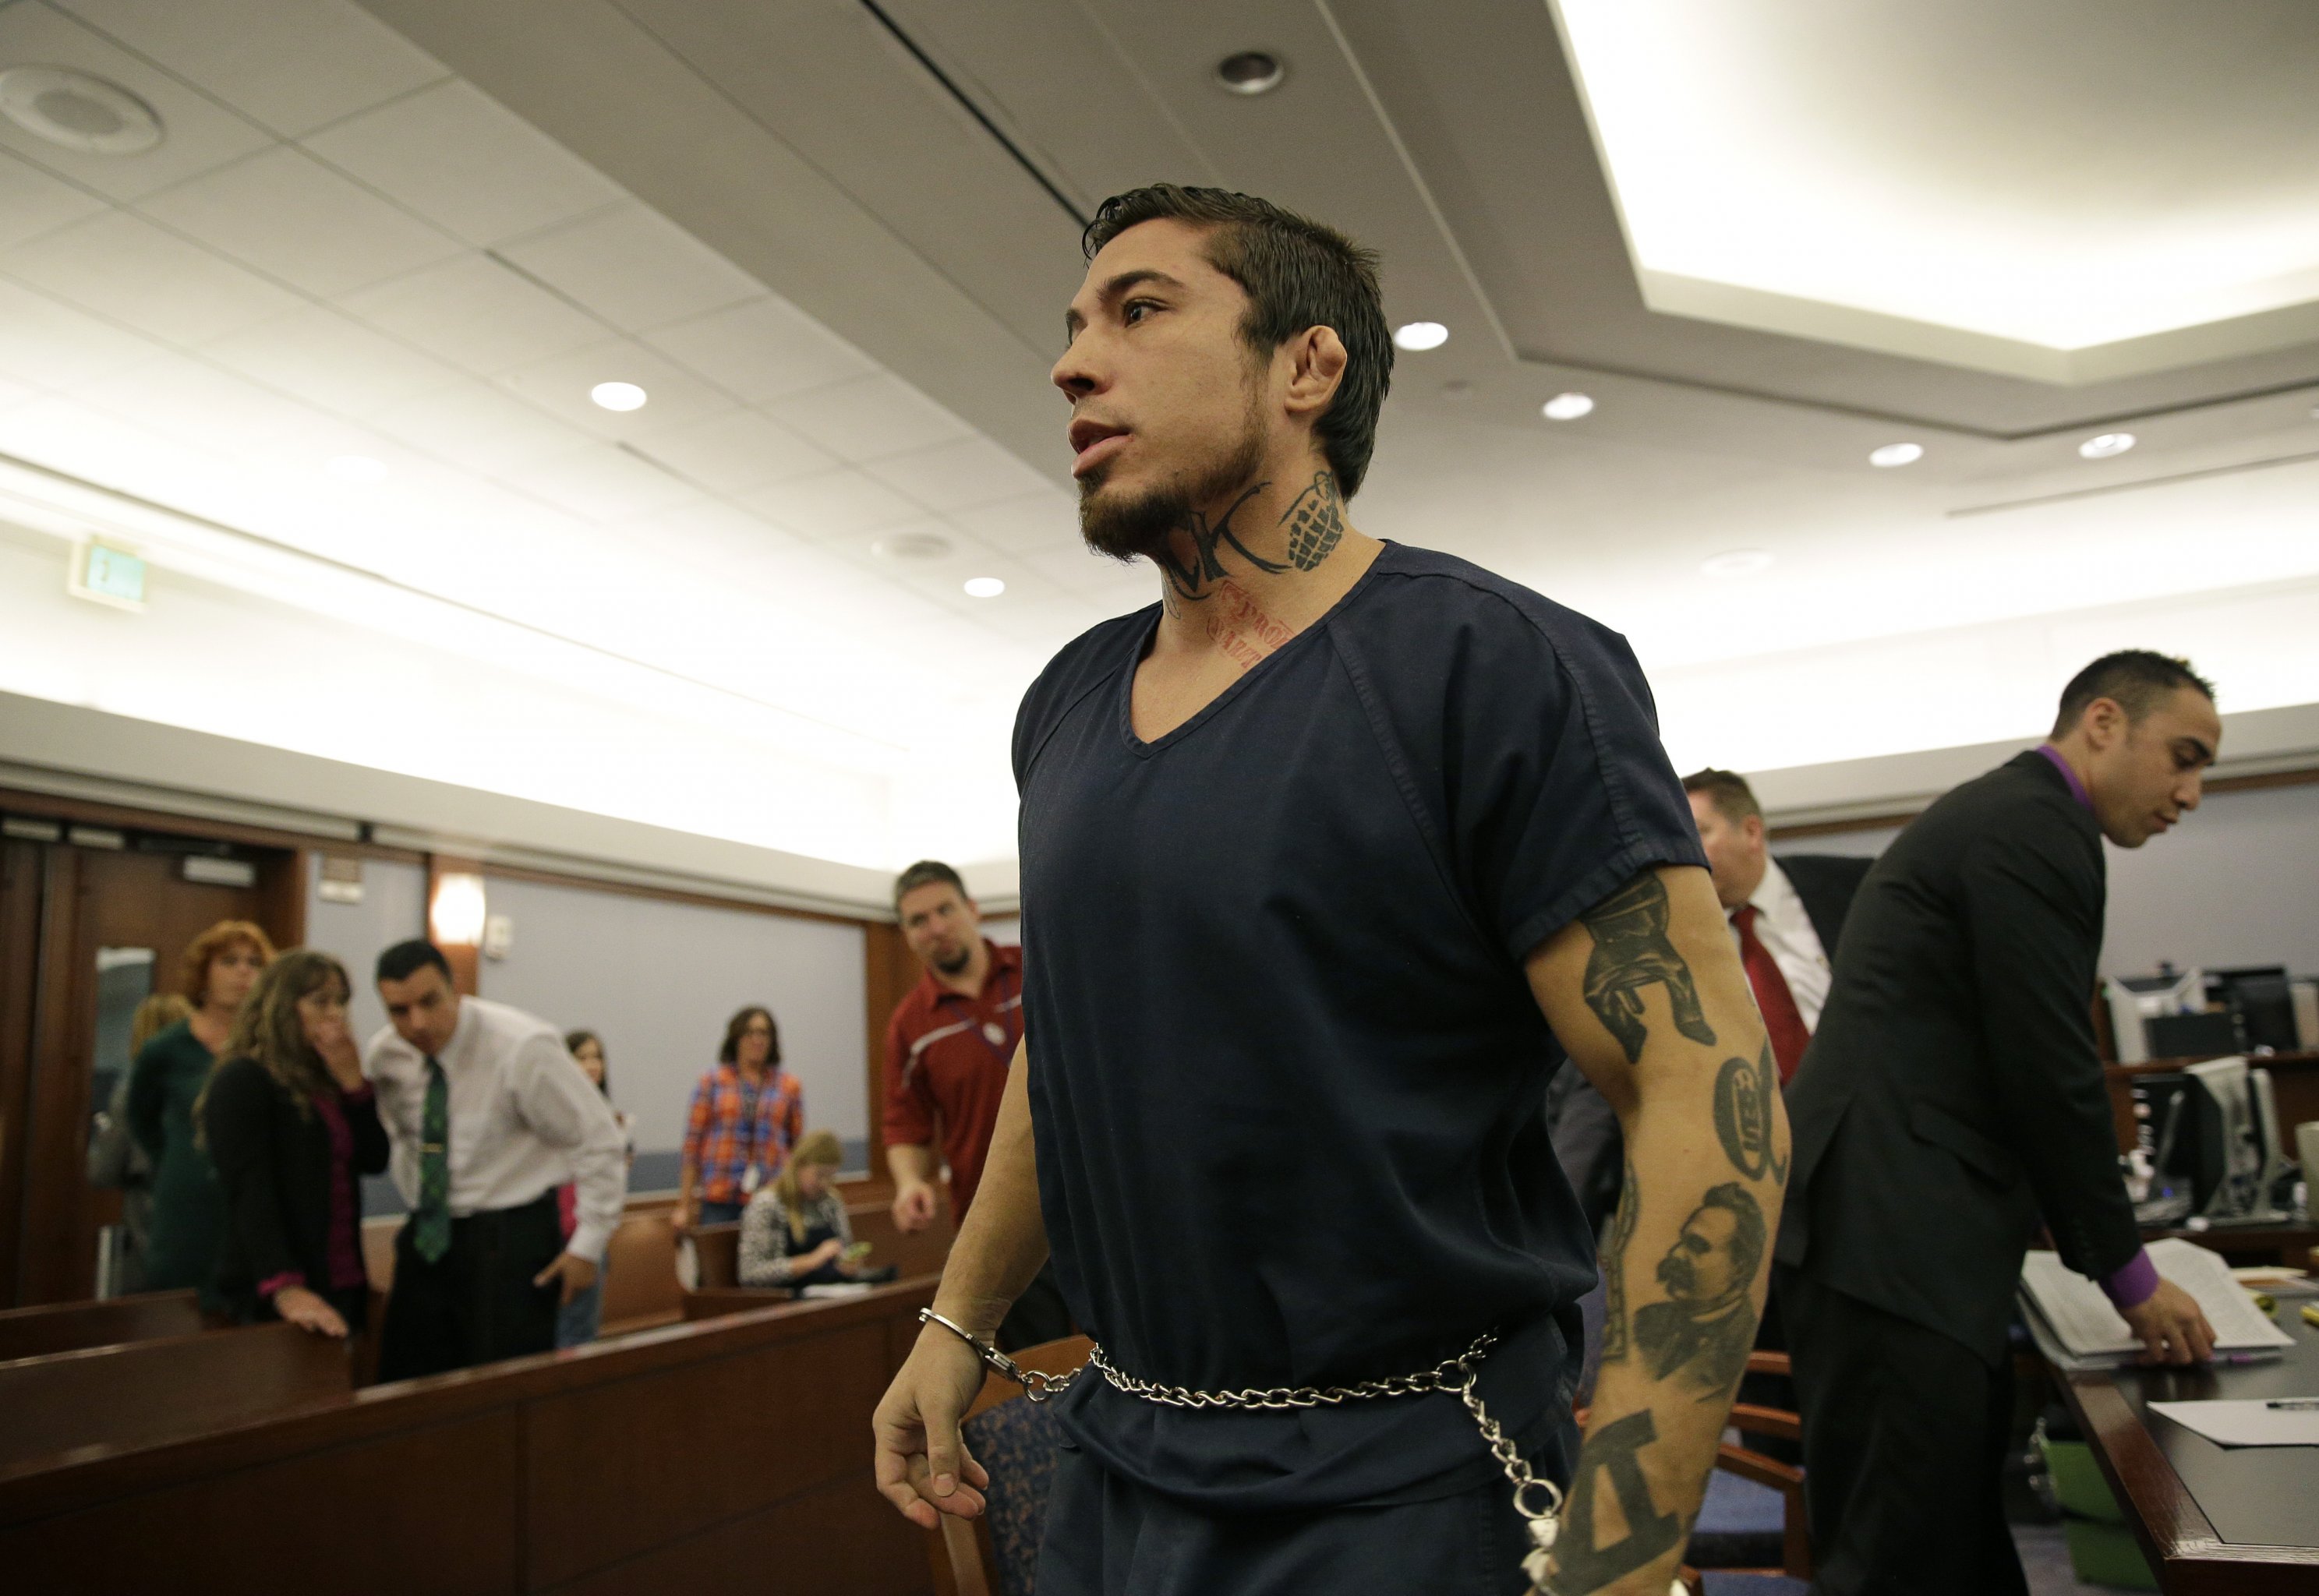 War Machine' Wanted in Brutal Beating of Porn Star